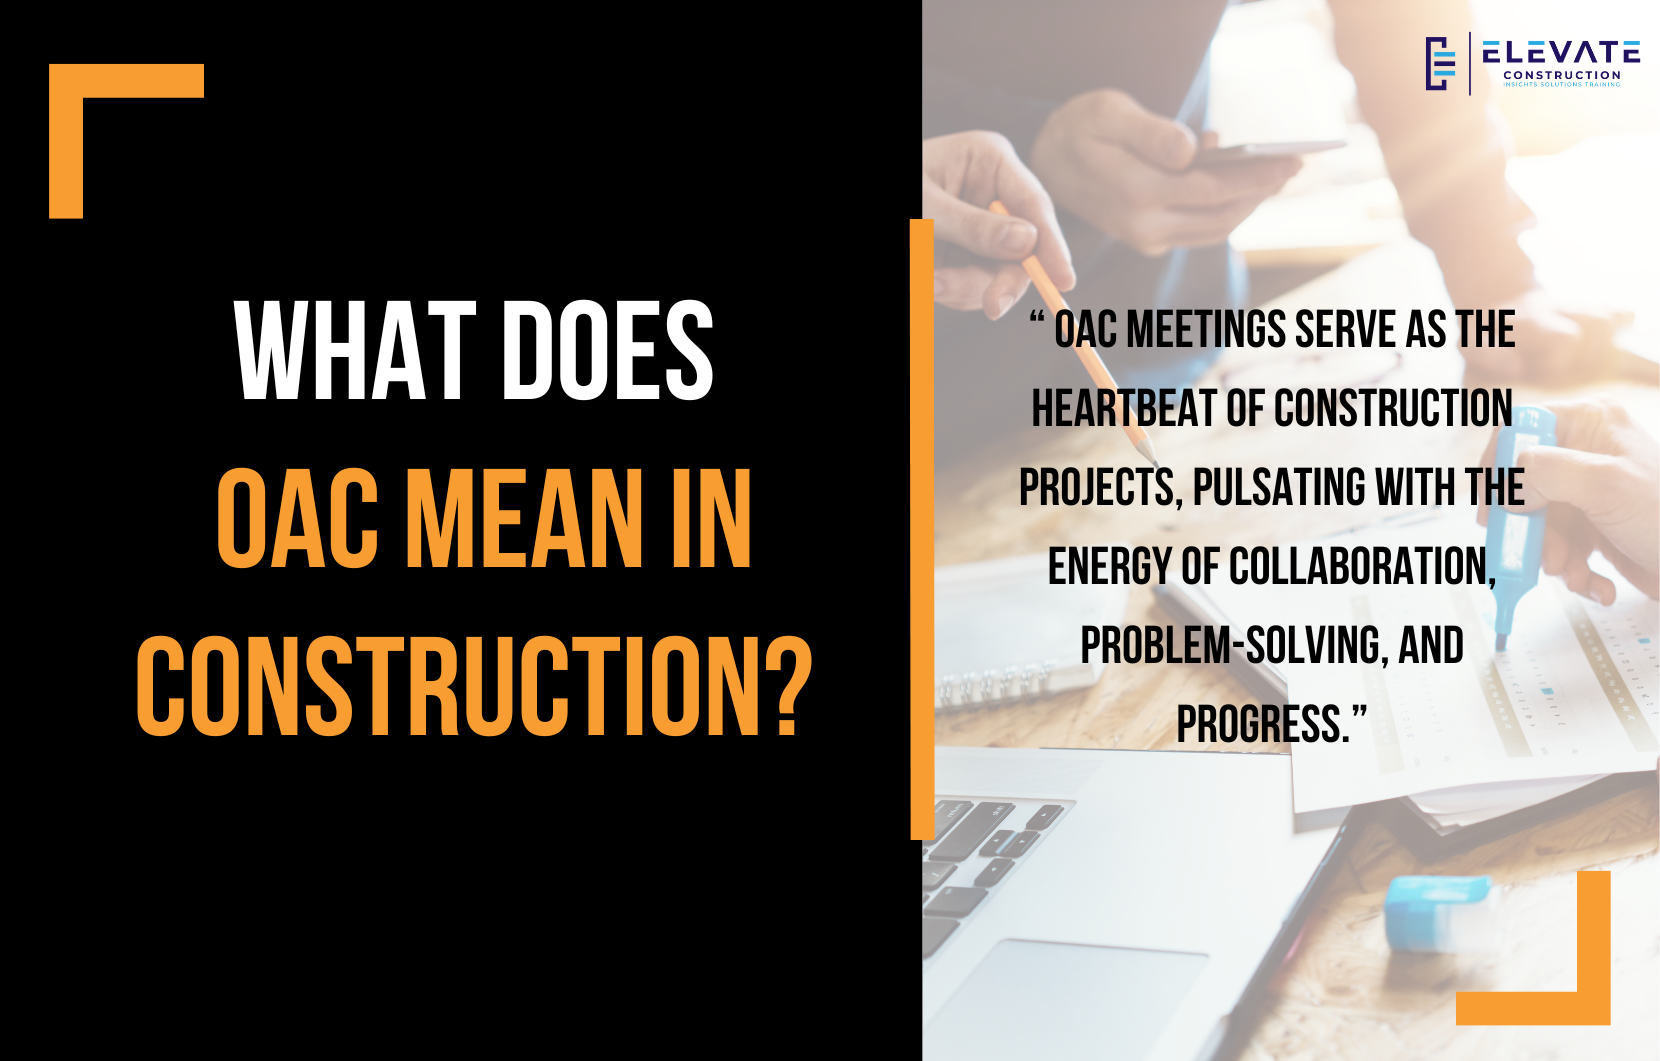 What Does OAC Mean In Construction?